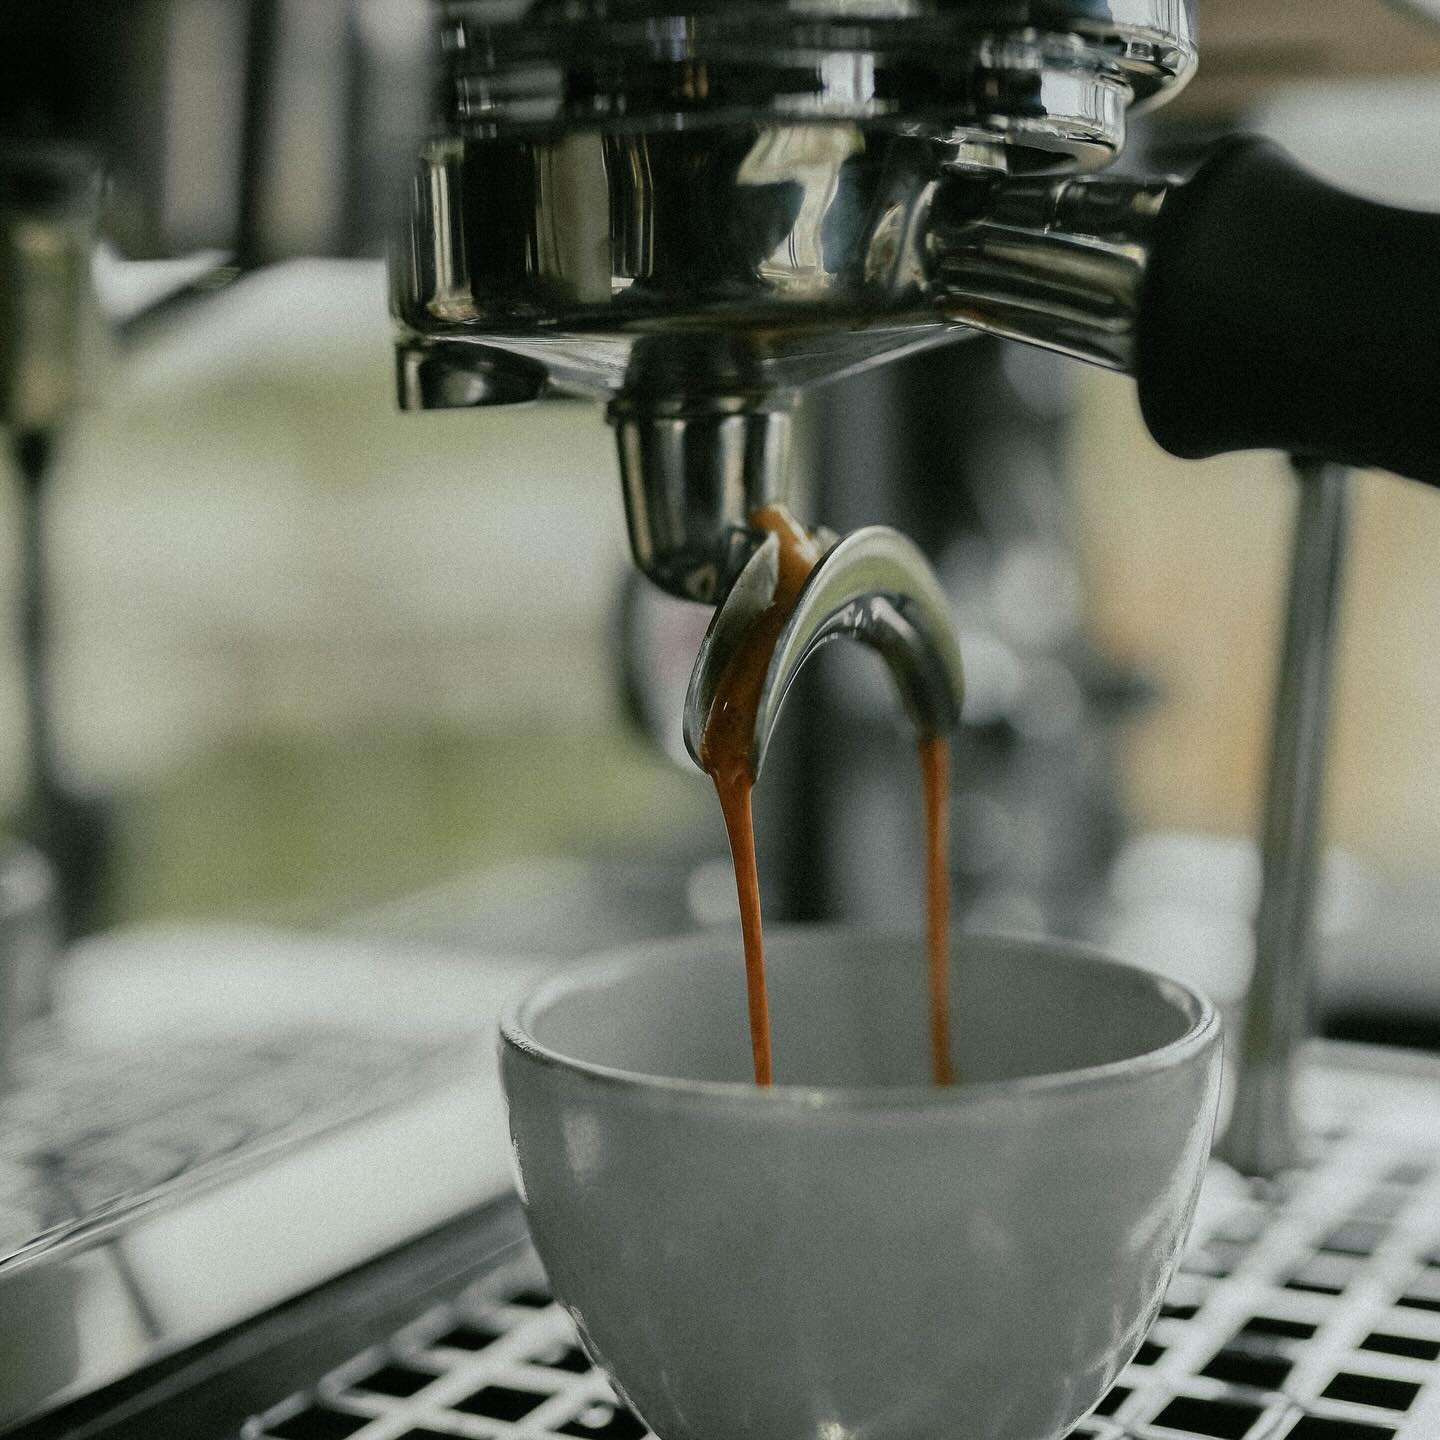 When the espresso pulls this clean 😘

With years of experience in specialty coffee, we are confident that the coffee we&rsquo;re serving will not only look good, but it&rsquo;ll taste top tier every single time. 

Dialling in espresso doesn&rsquo;t 